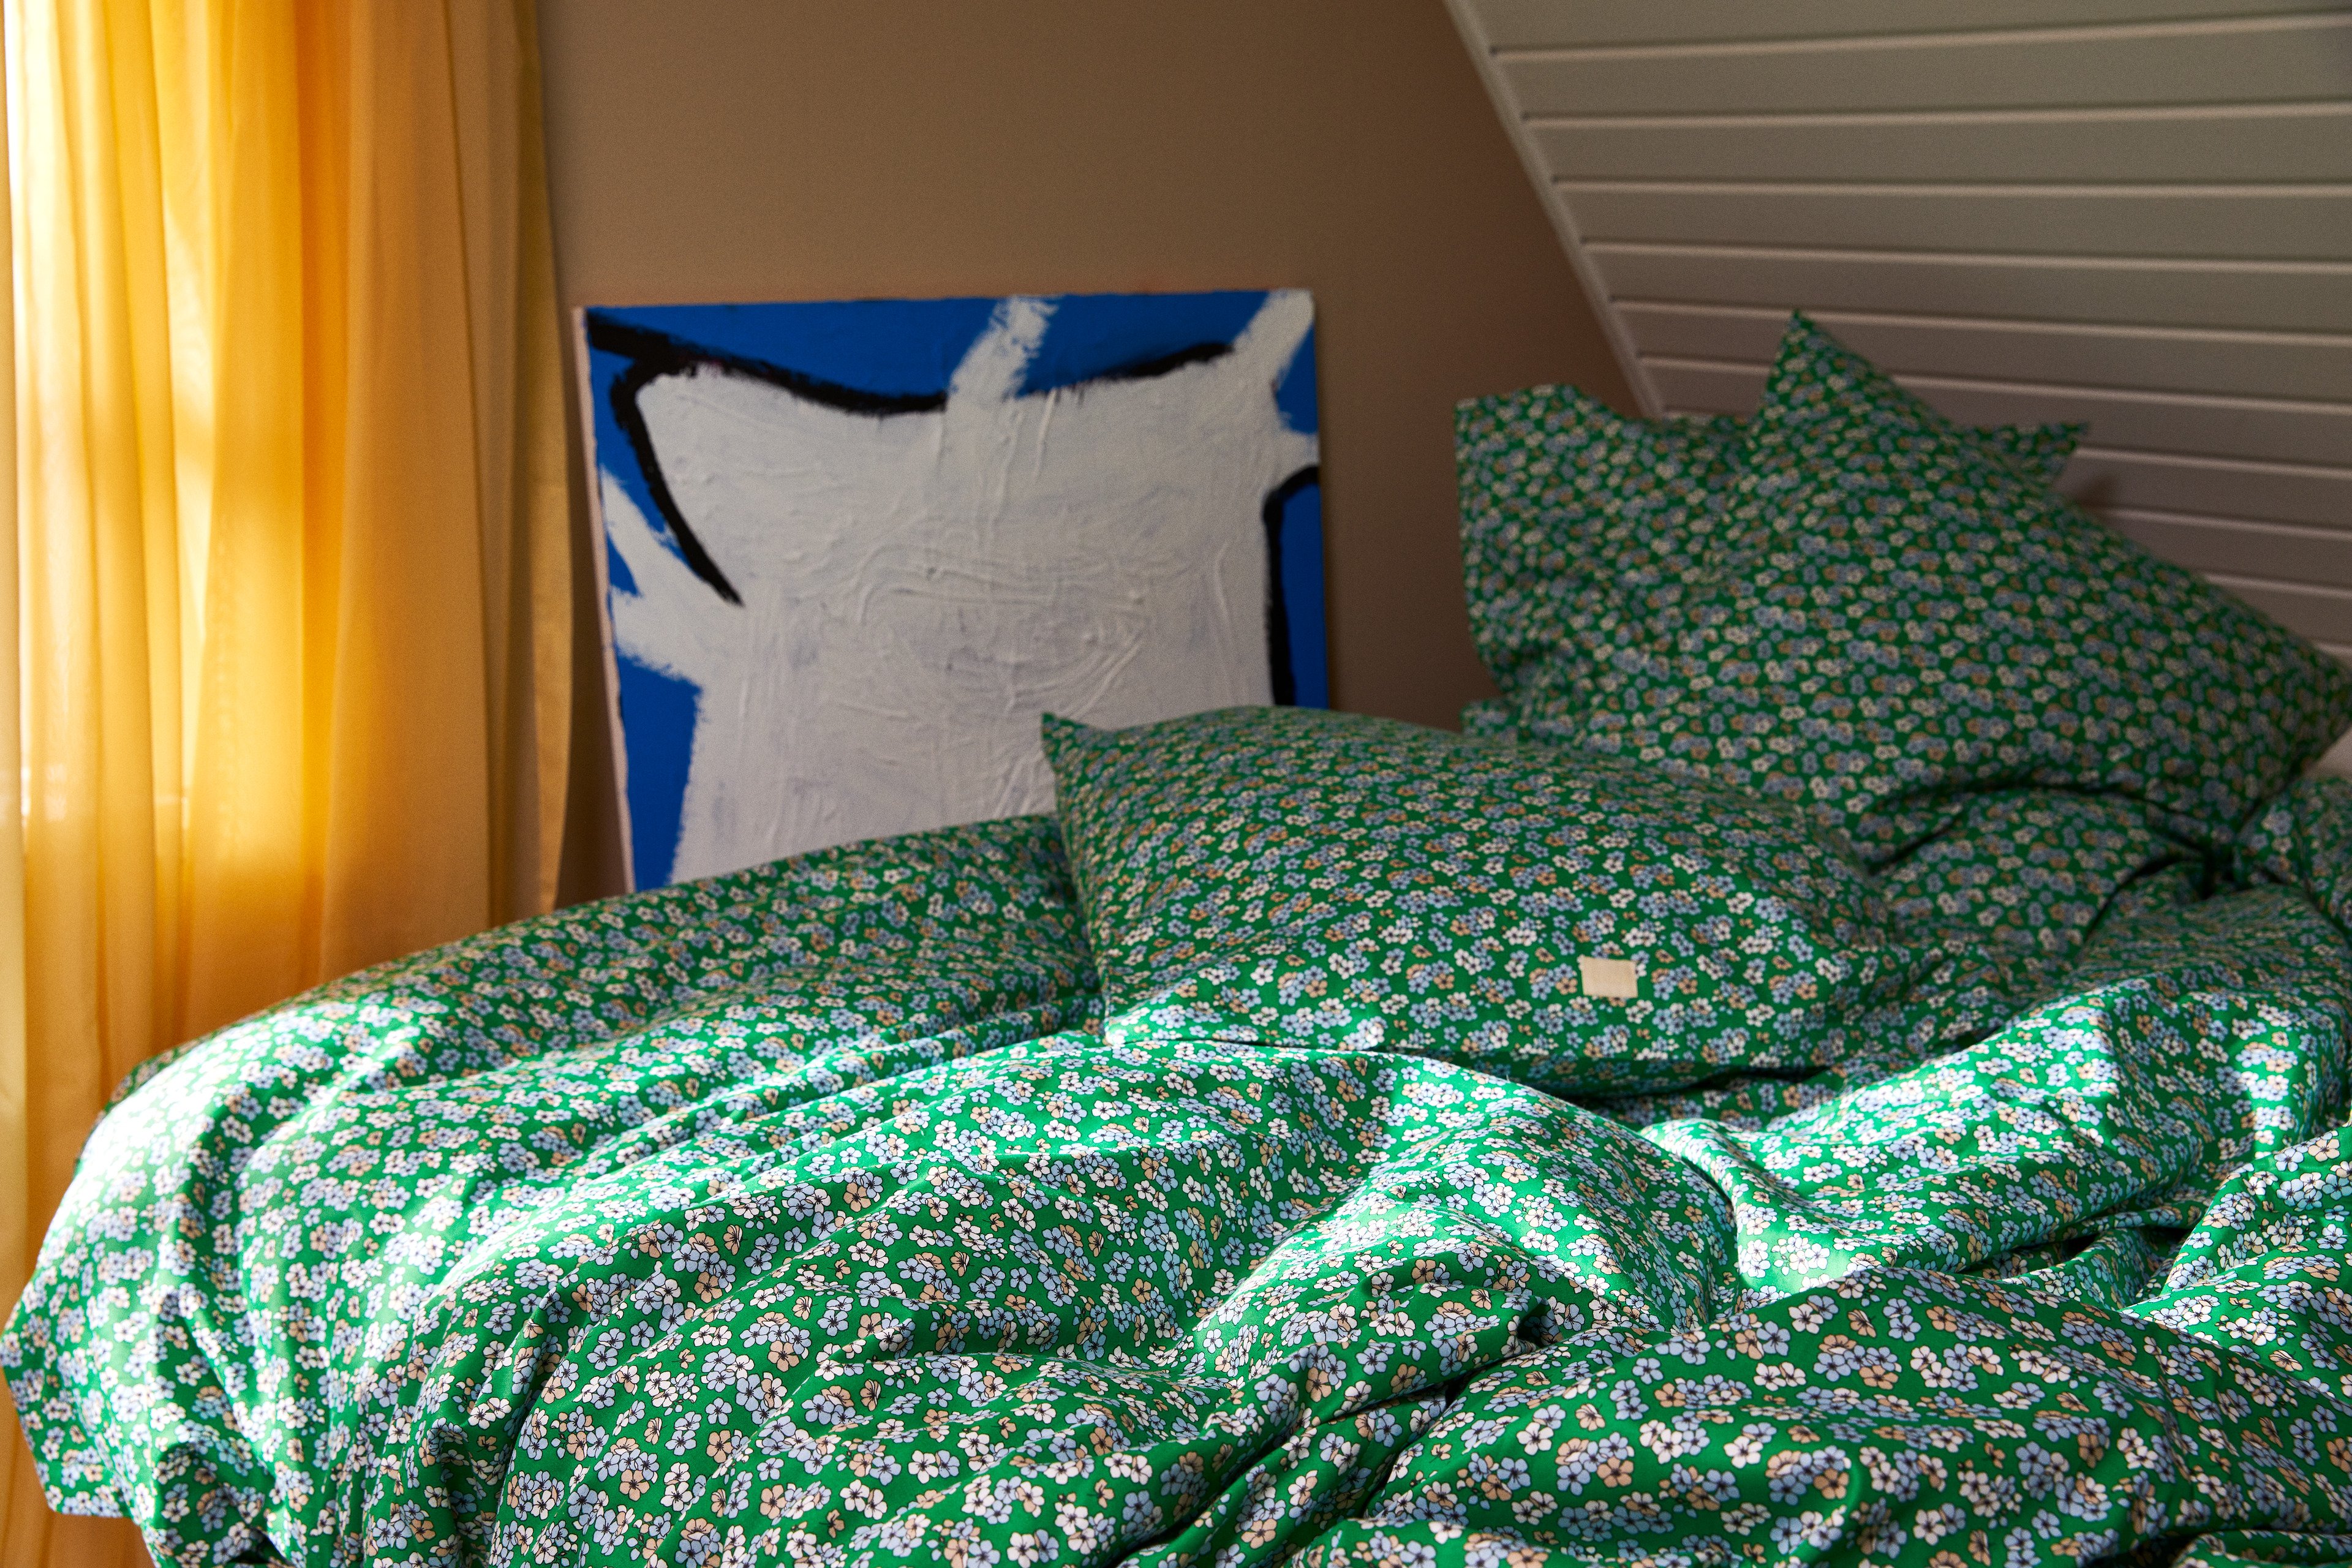 Bedding from the Juna Pleasantly series